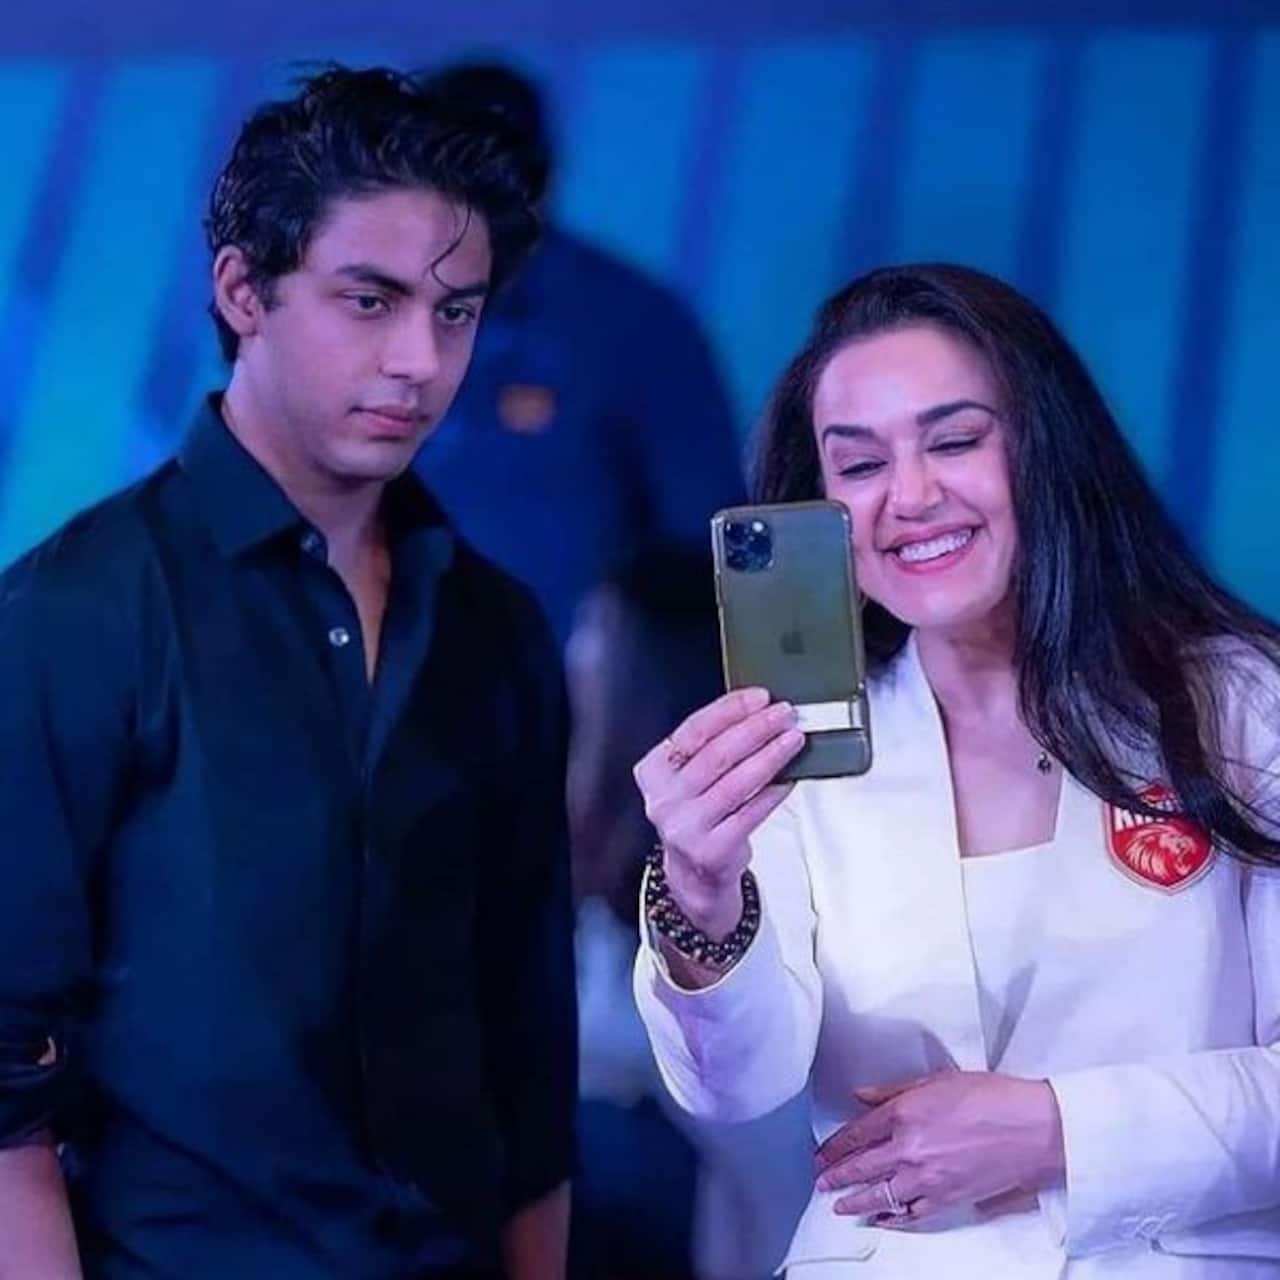 Aryan Khan Arrest: Preity Zinta rushes to Mannat to give moral support to Shah Rukh Khan and Gauri